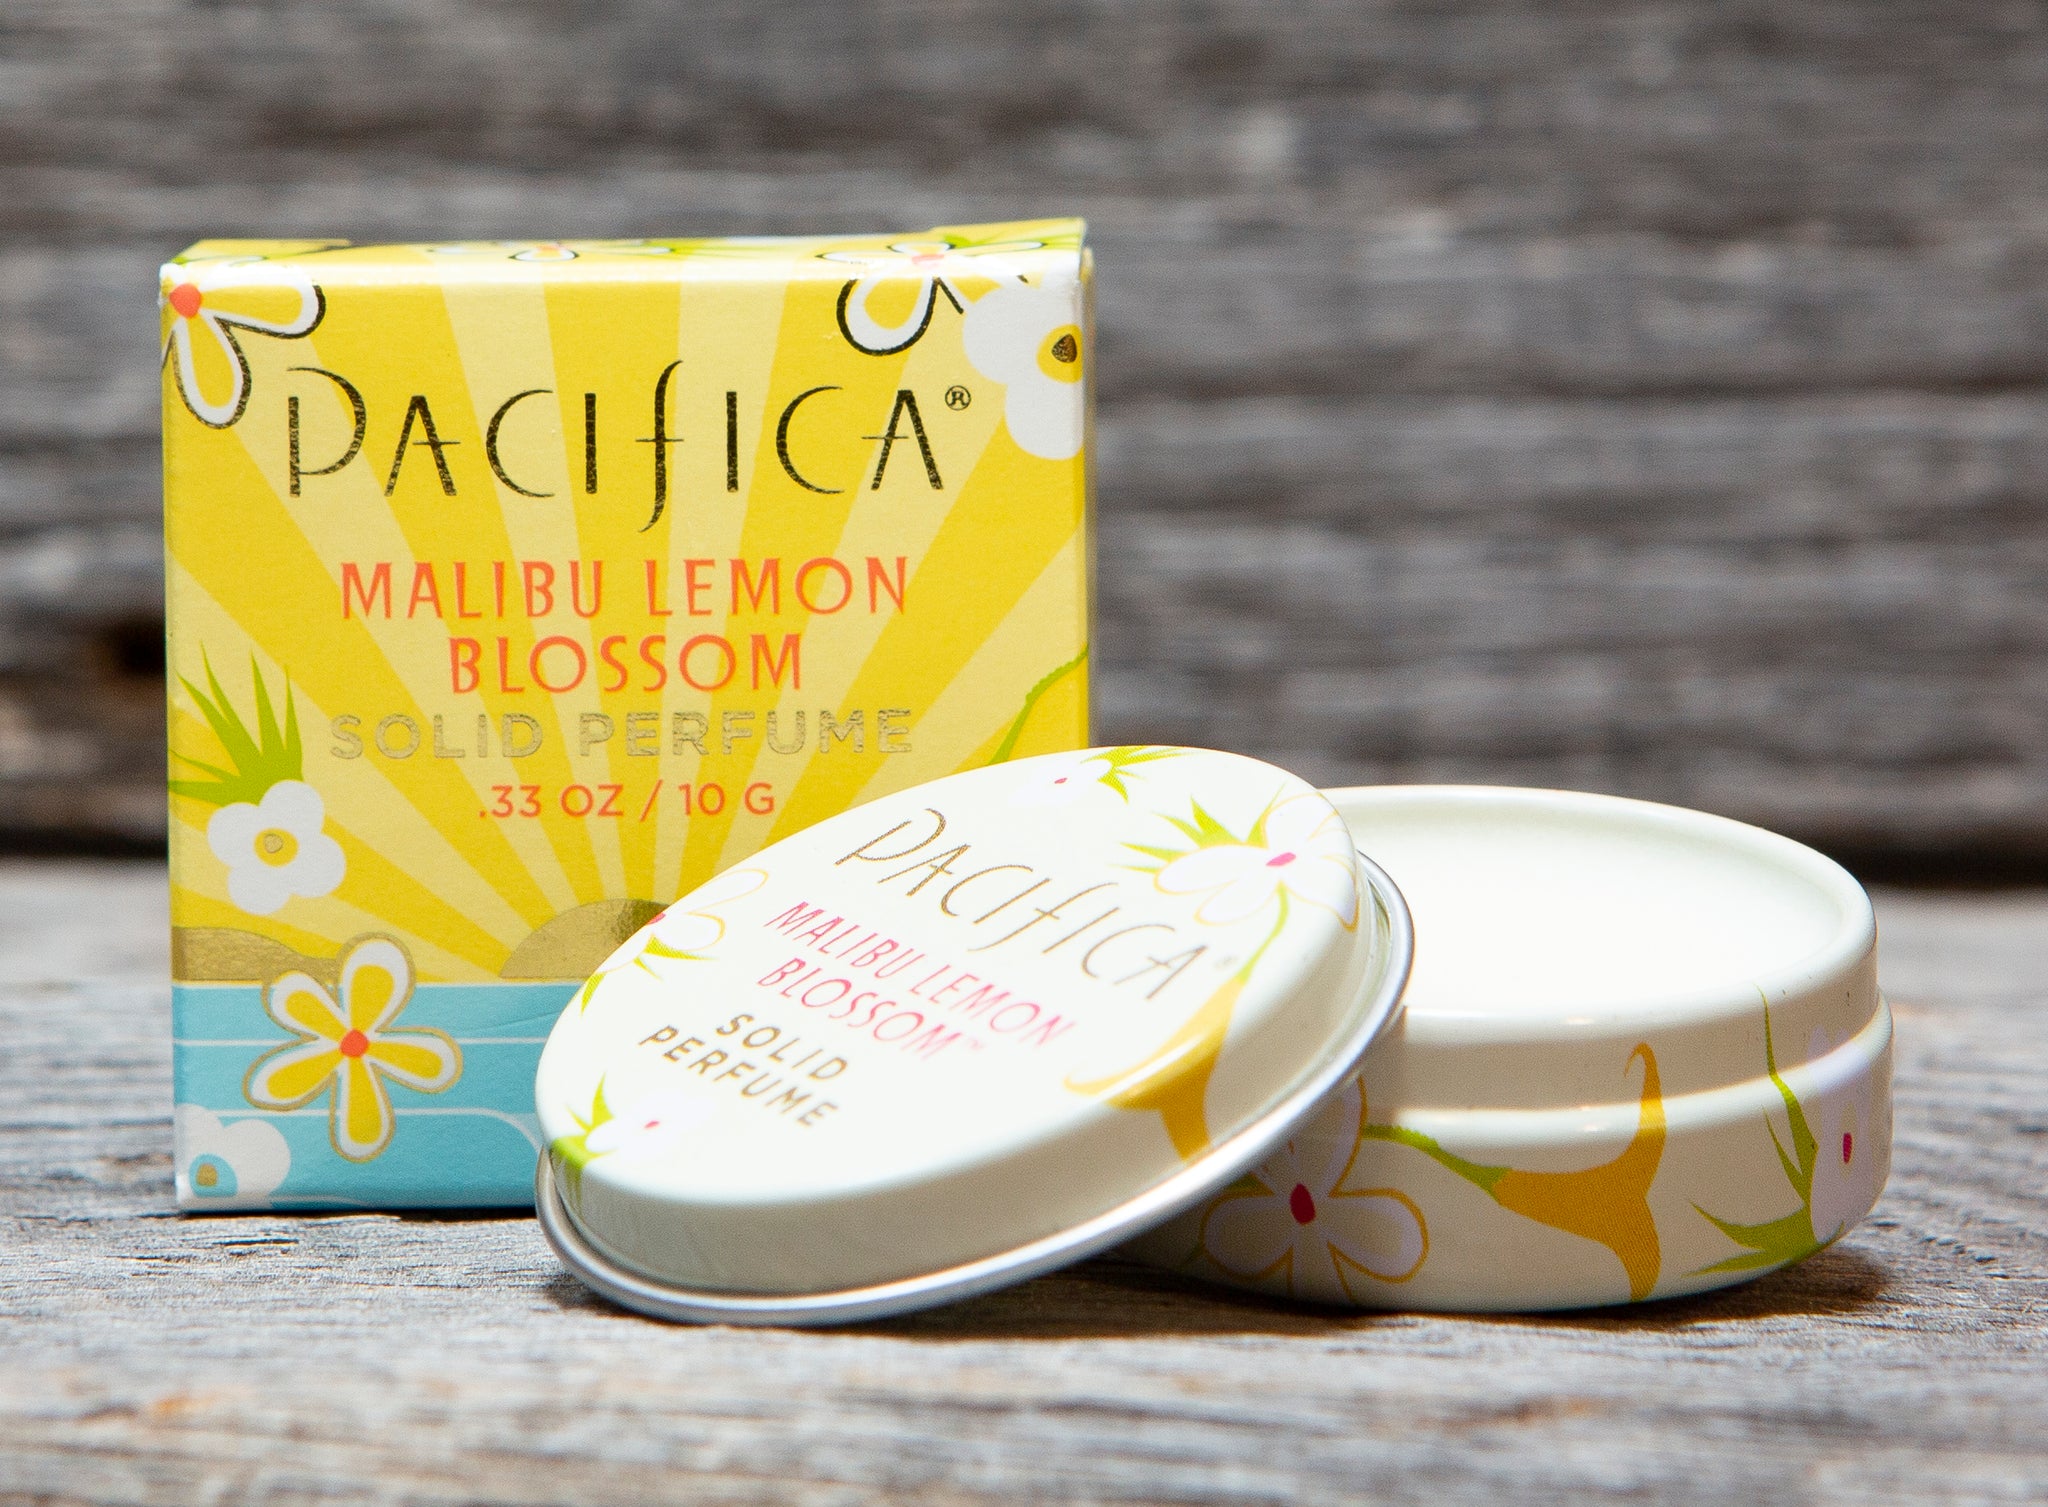 Pacifica Malibu Lemon Blossom Solid Perfume by Pacifica VERY RARE - LAST REMAINING- LOW INVENTORY